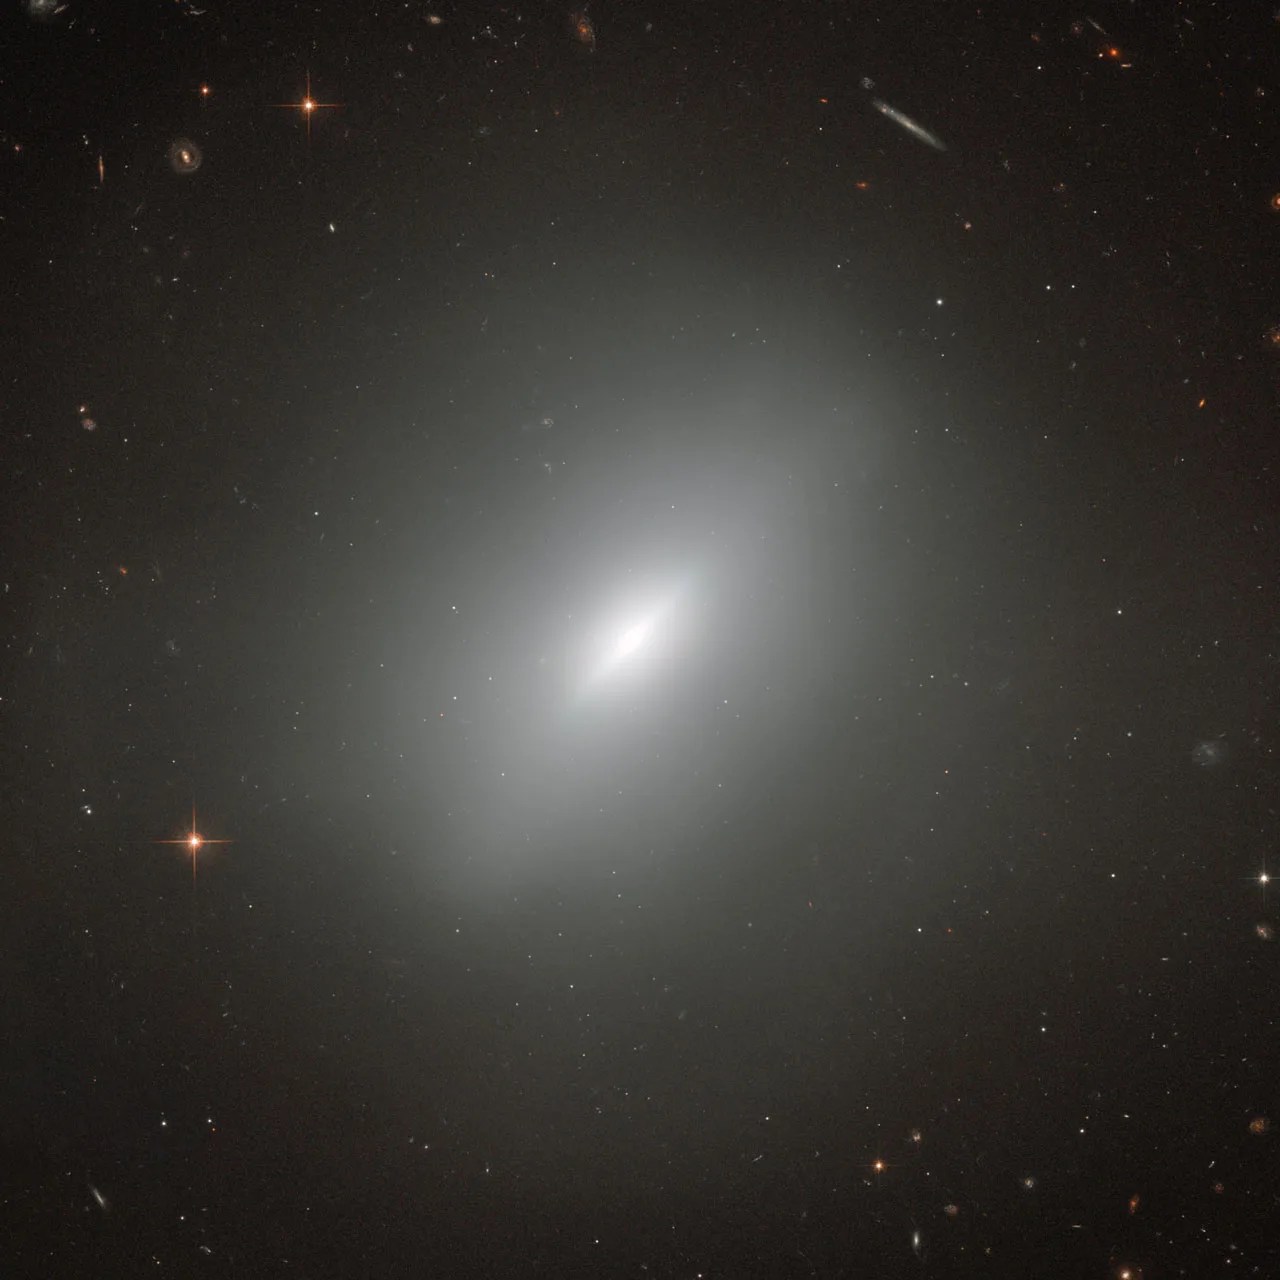 The soft white haze of light from the elliptical galaxy fills most of the image. At its core is a brighter, more defined disk